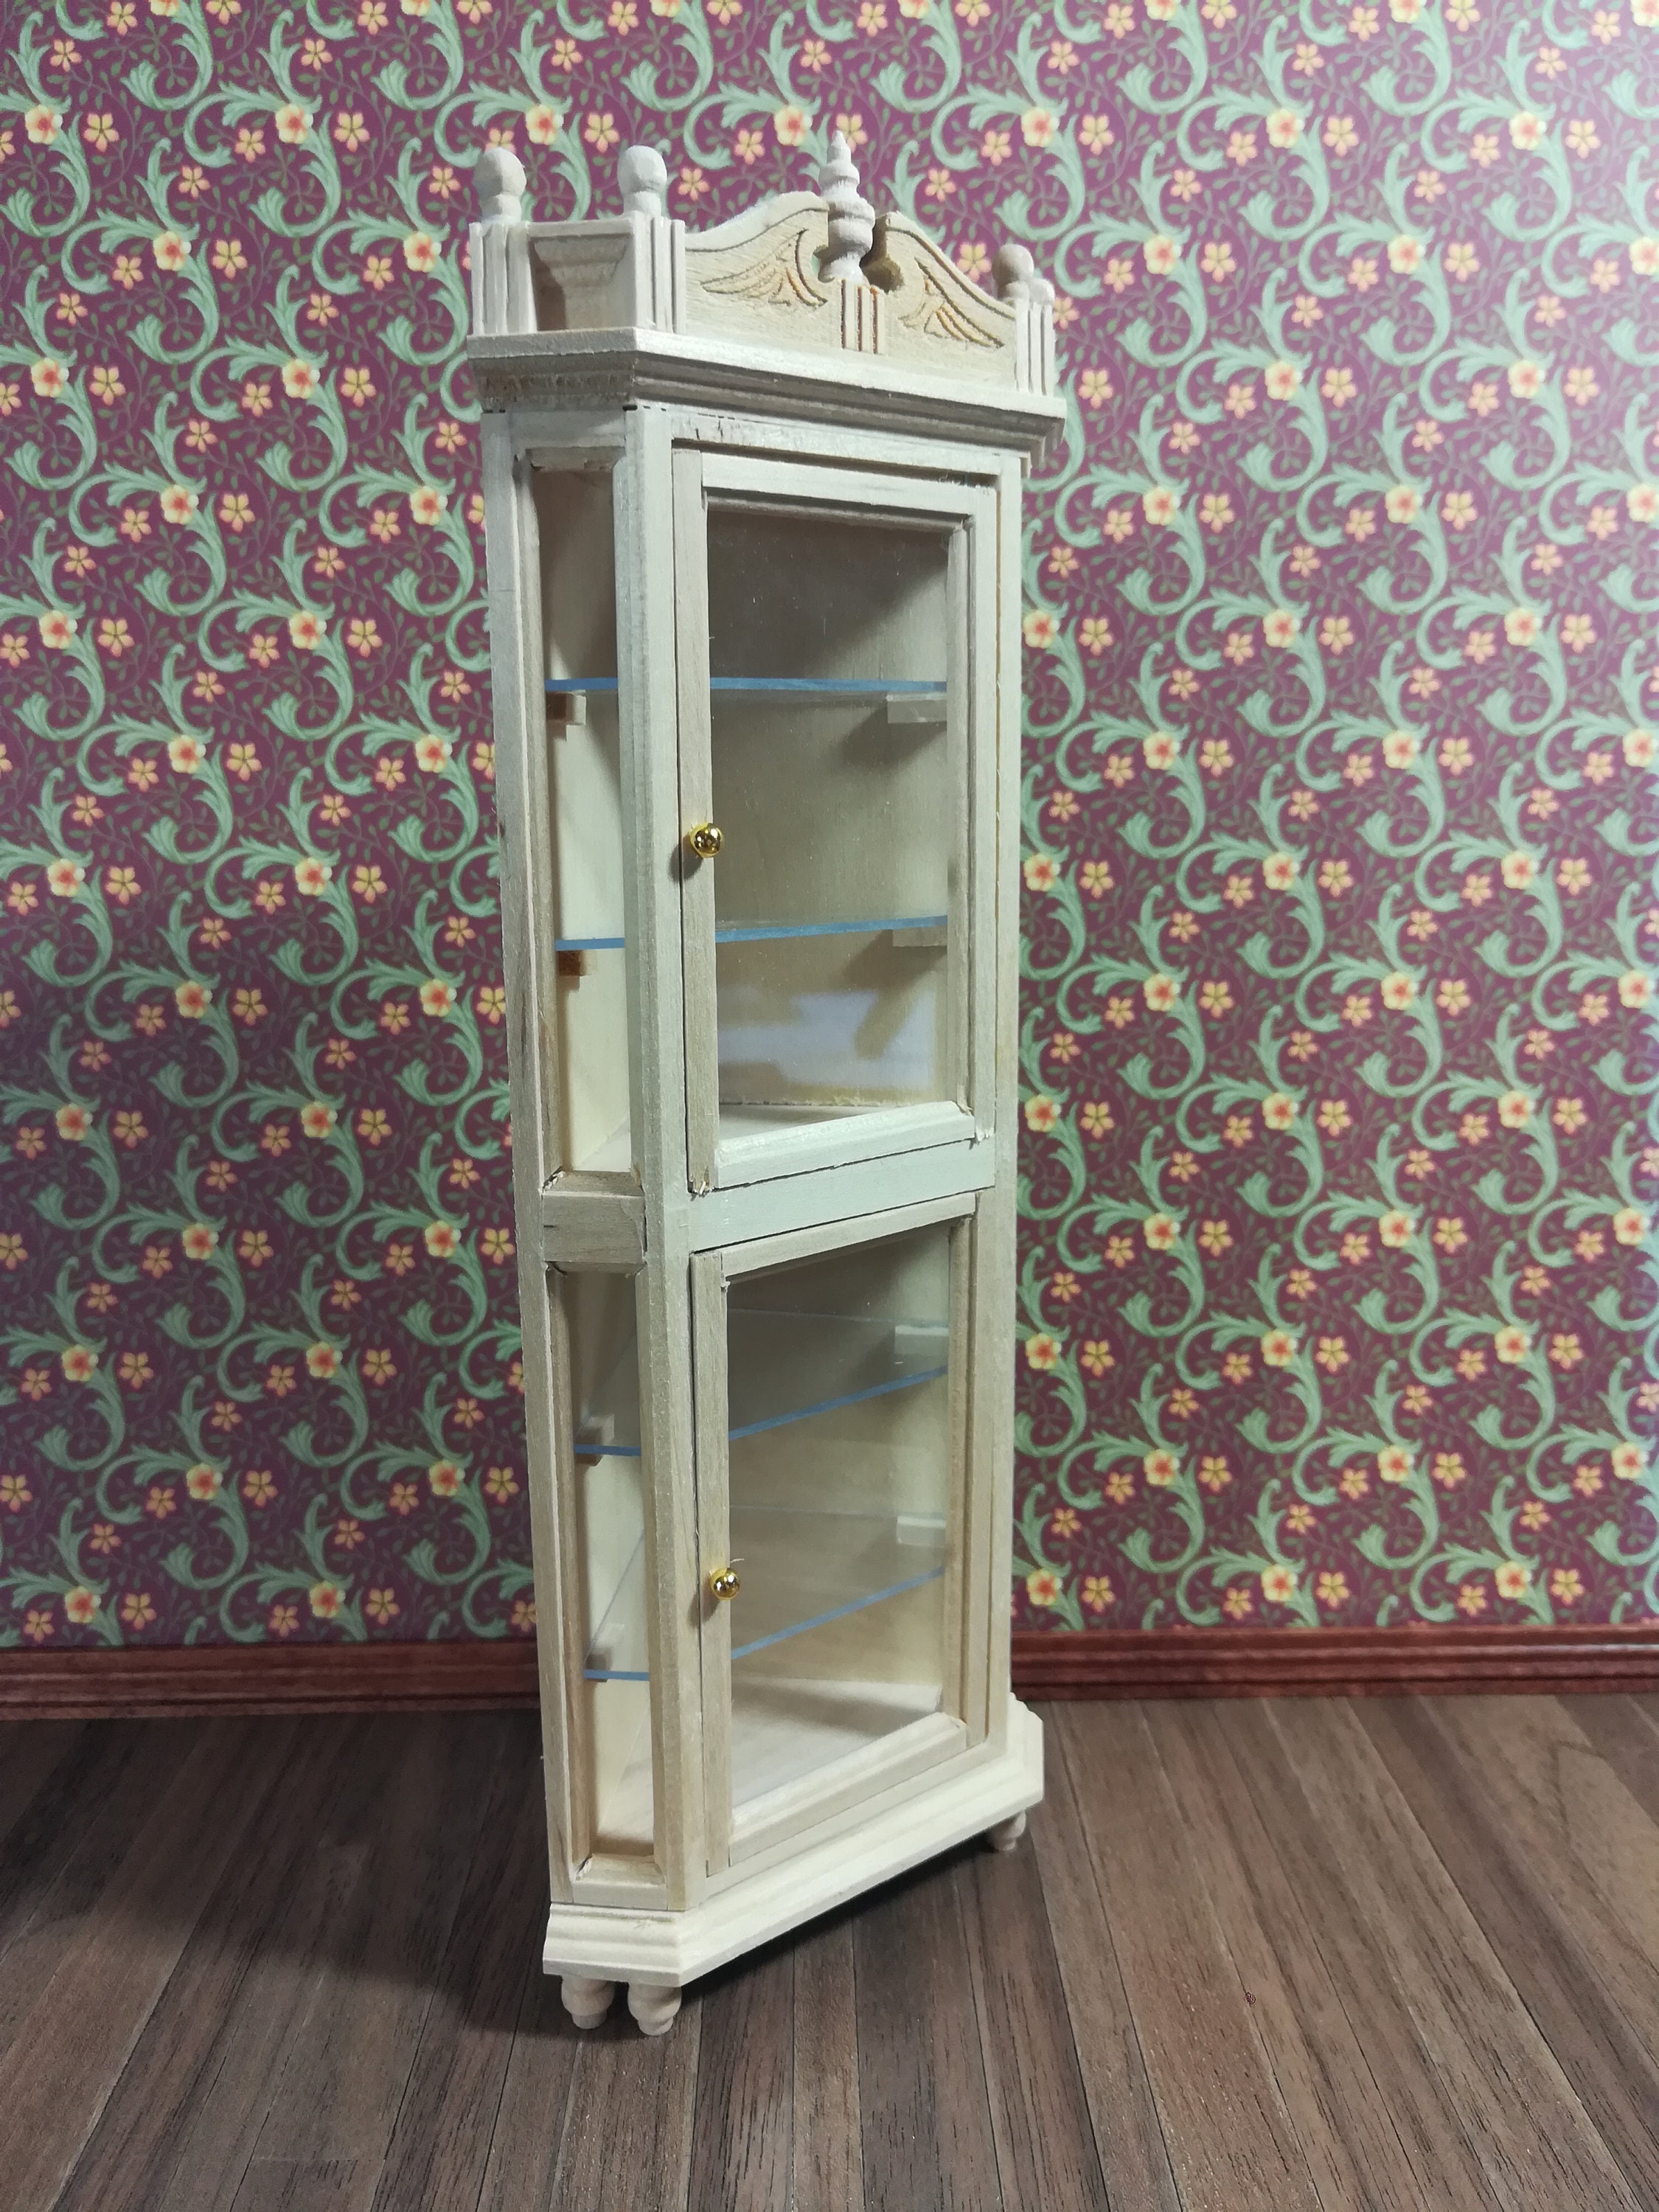 Dollhouse Miniature Corner Display Cabinet Unfinished 1 12 Scale